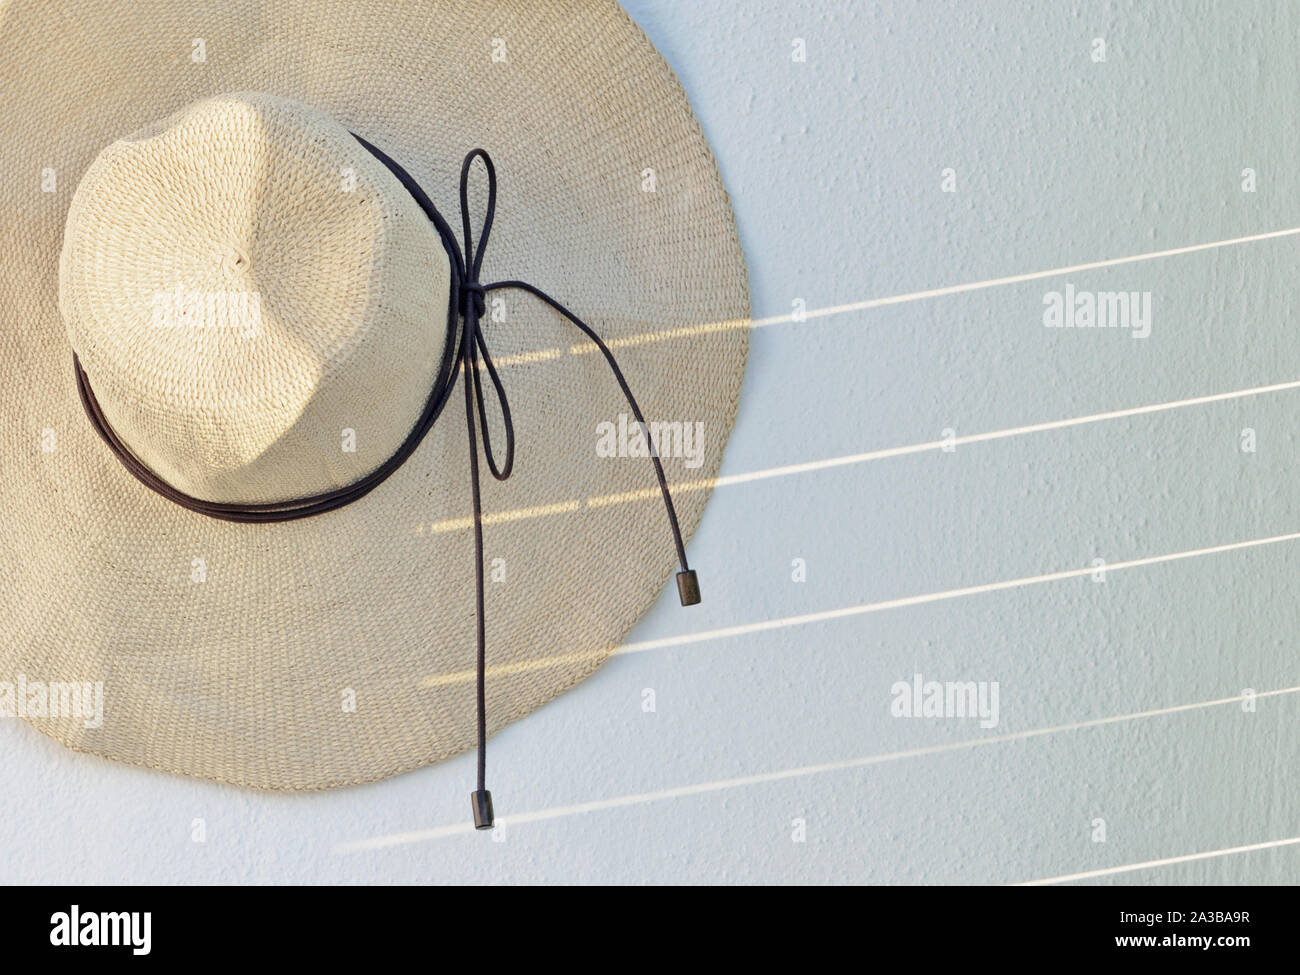 Straw hat hanging on wall Stock Photo